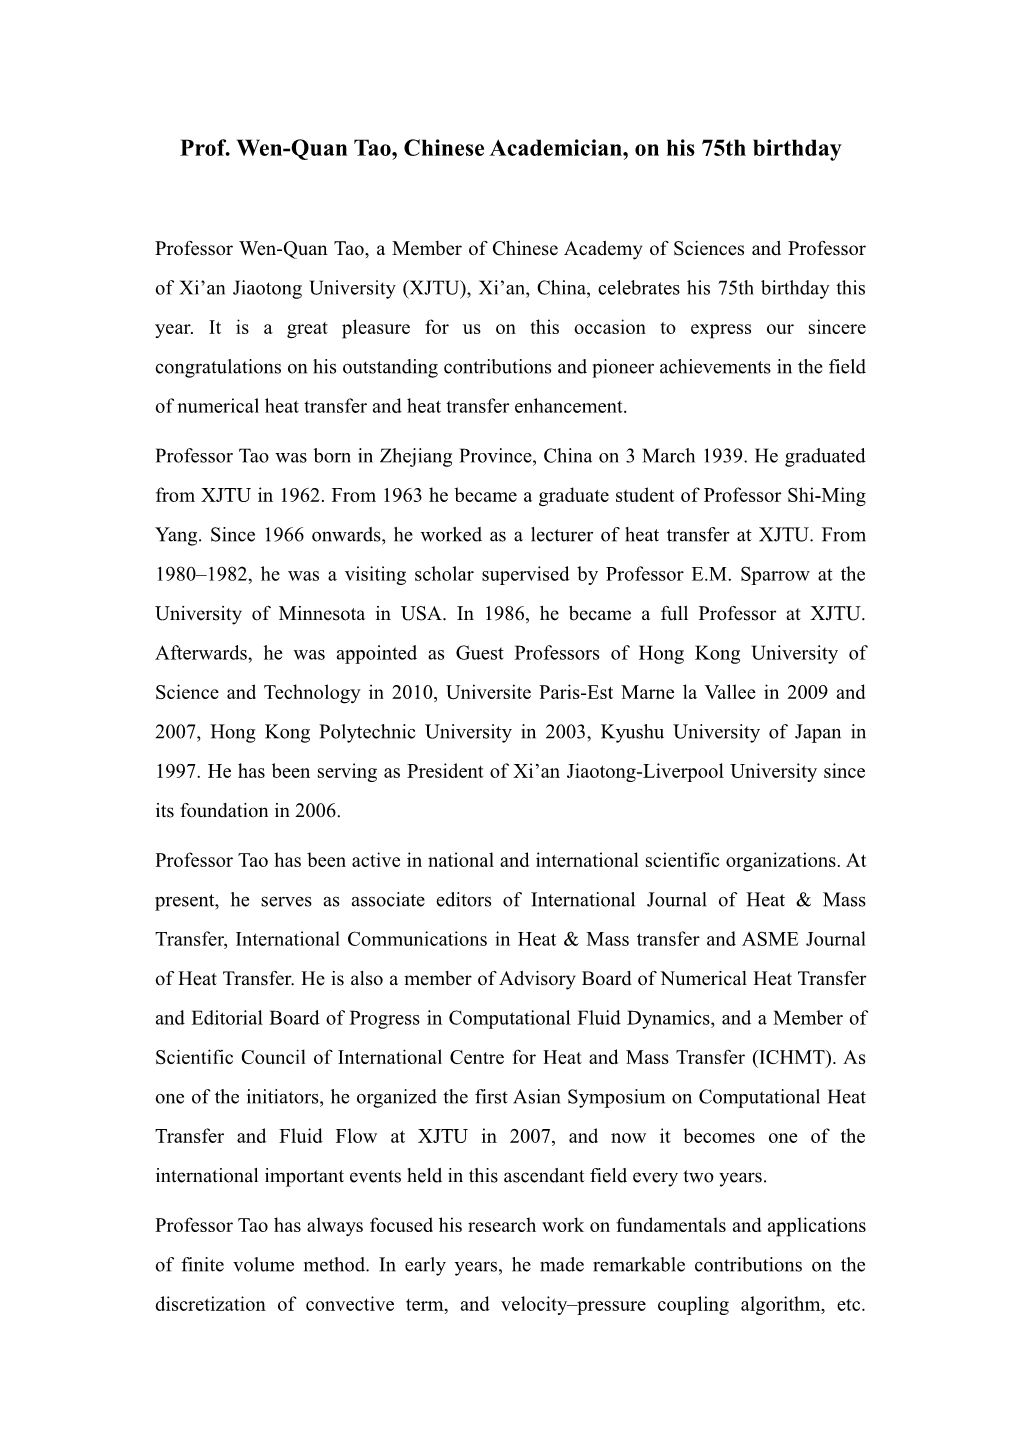 Prof. Wen-Quan Tao, Chinese Academician, on His 75Th Birthday